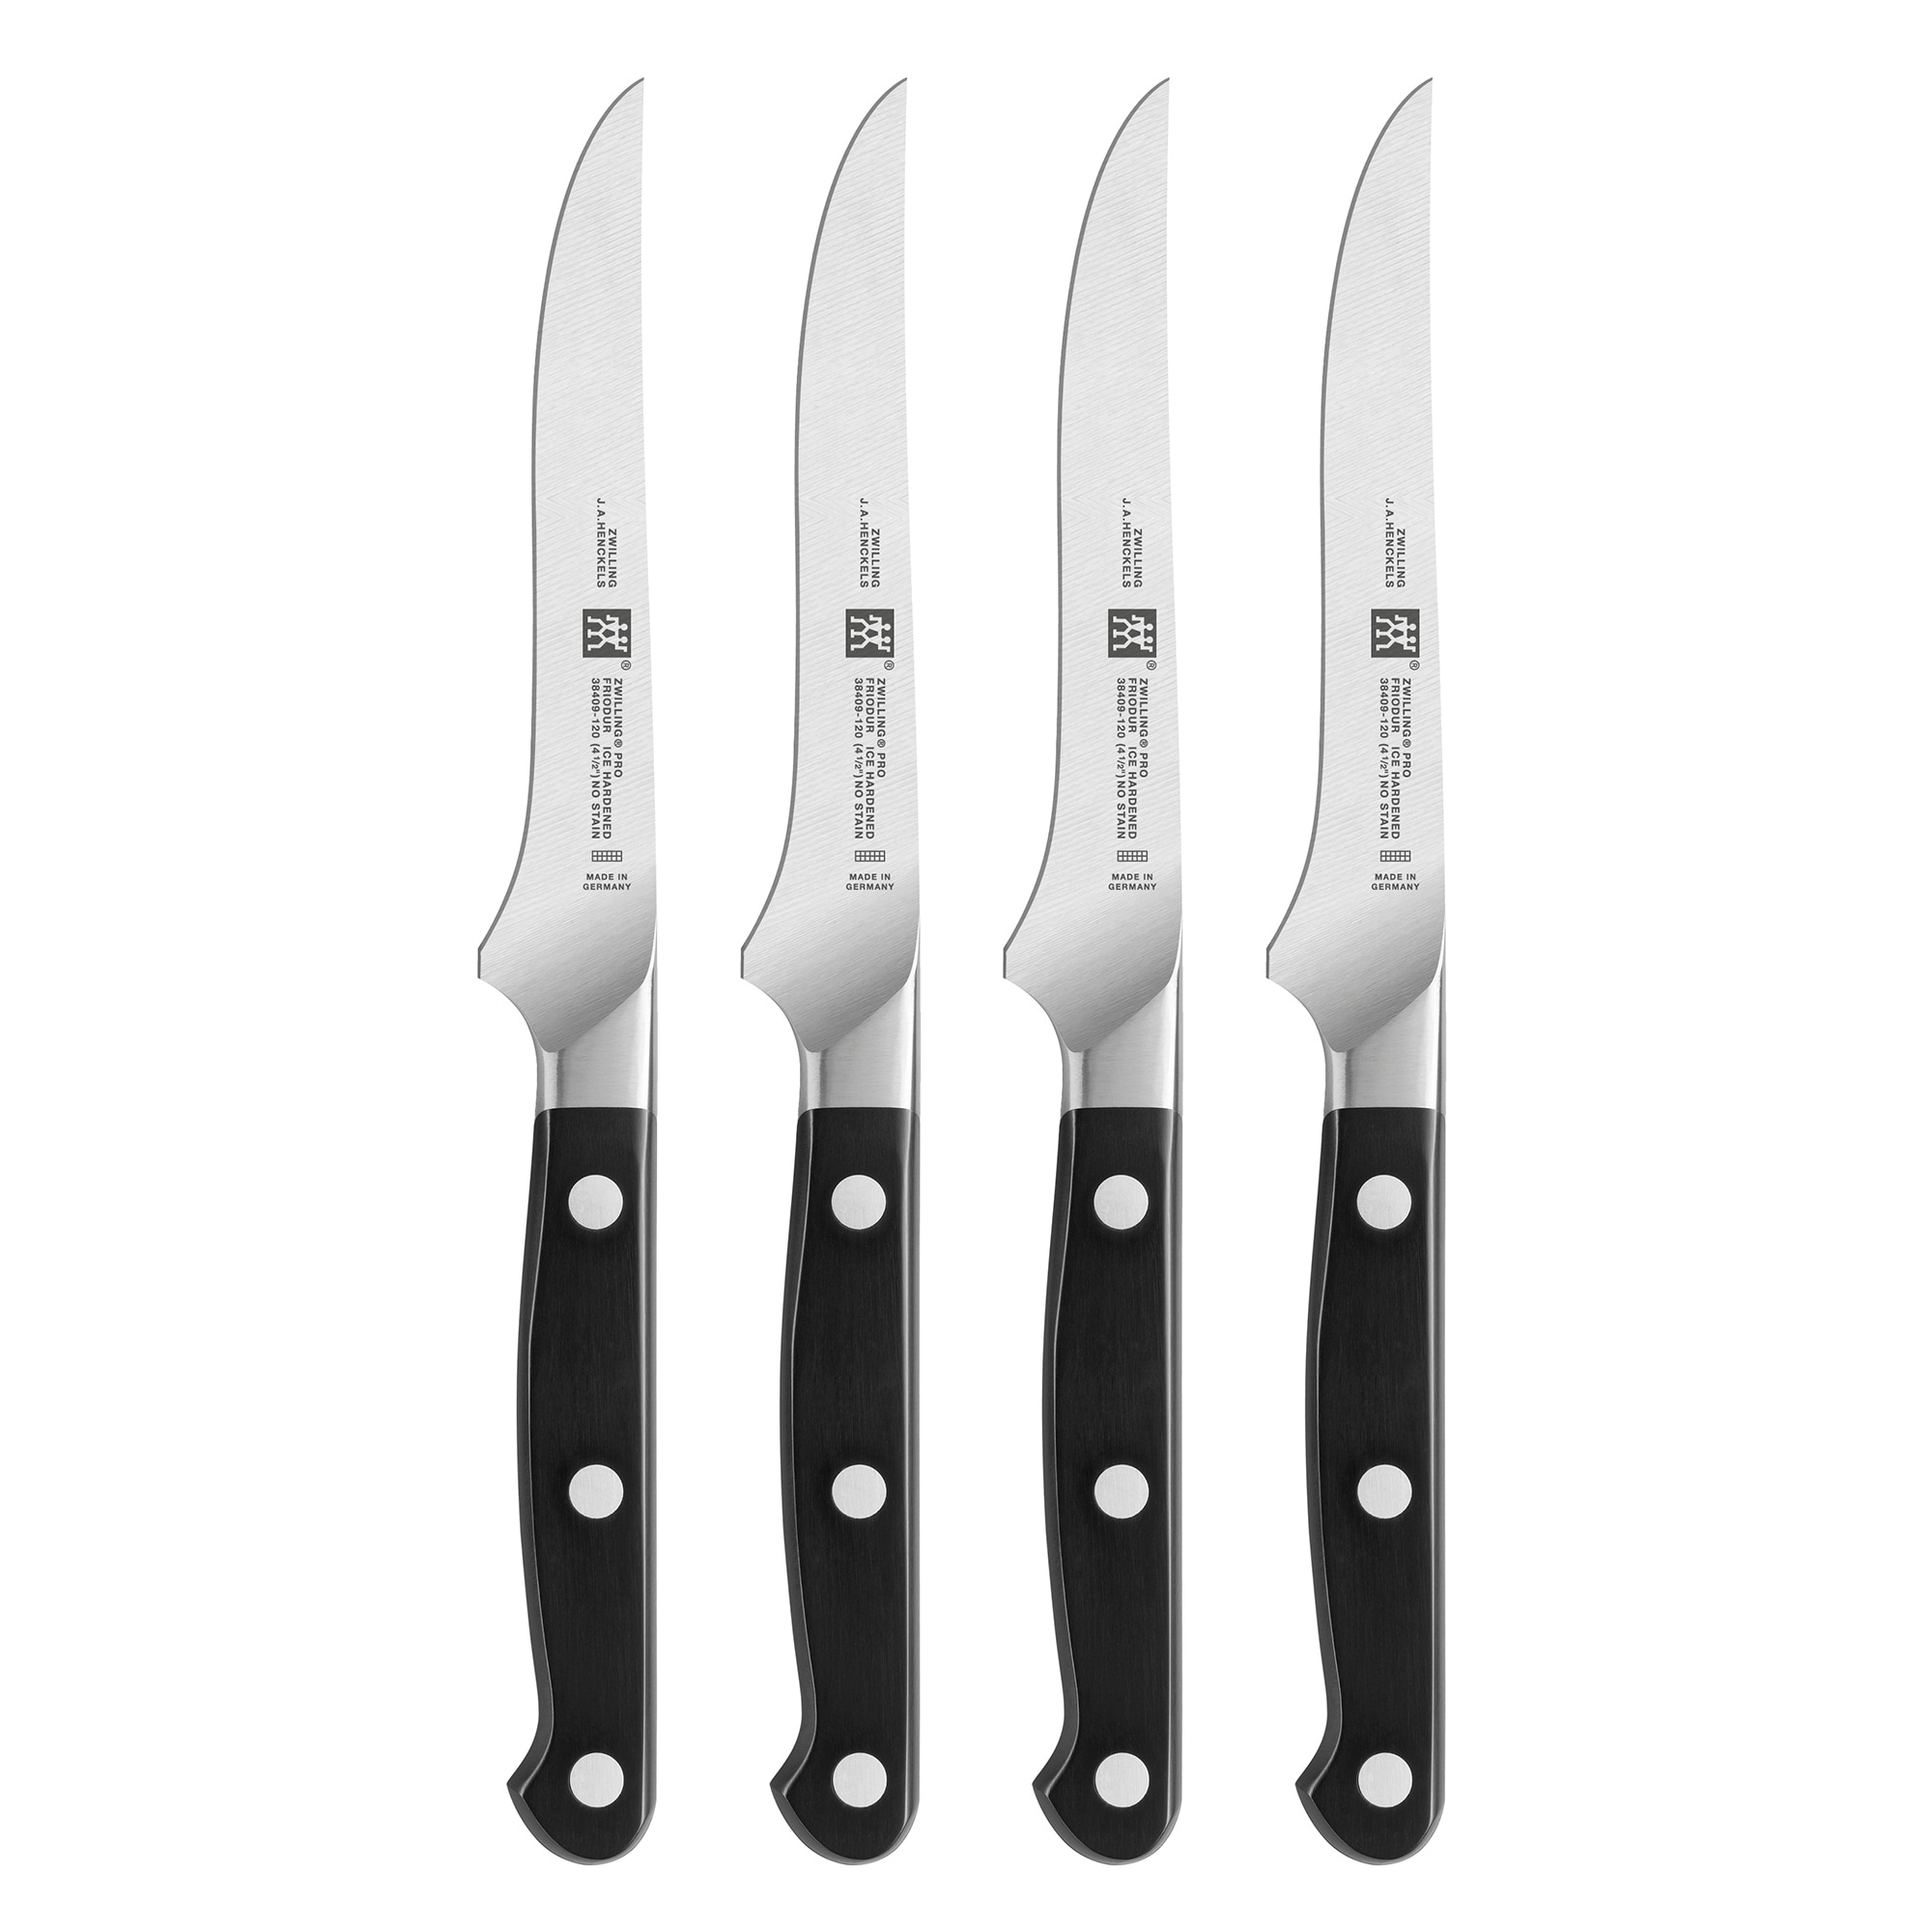 https://ak1.ostkcdn.com/images/products/is/images/direct/190c4adc4220724a1c0a42e0750dbec7a47b679b/ZWILLING-Pro-4-pc-Steak-Knife-Set.jpg